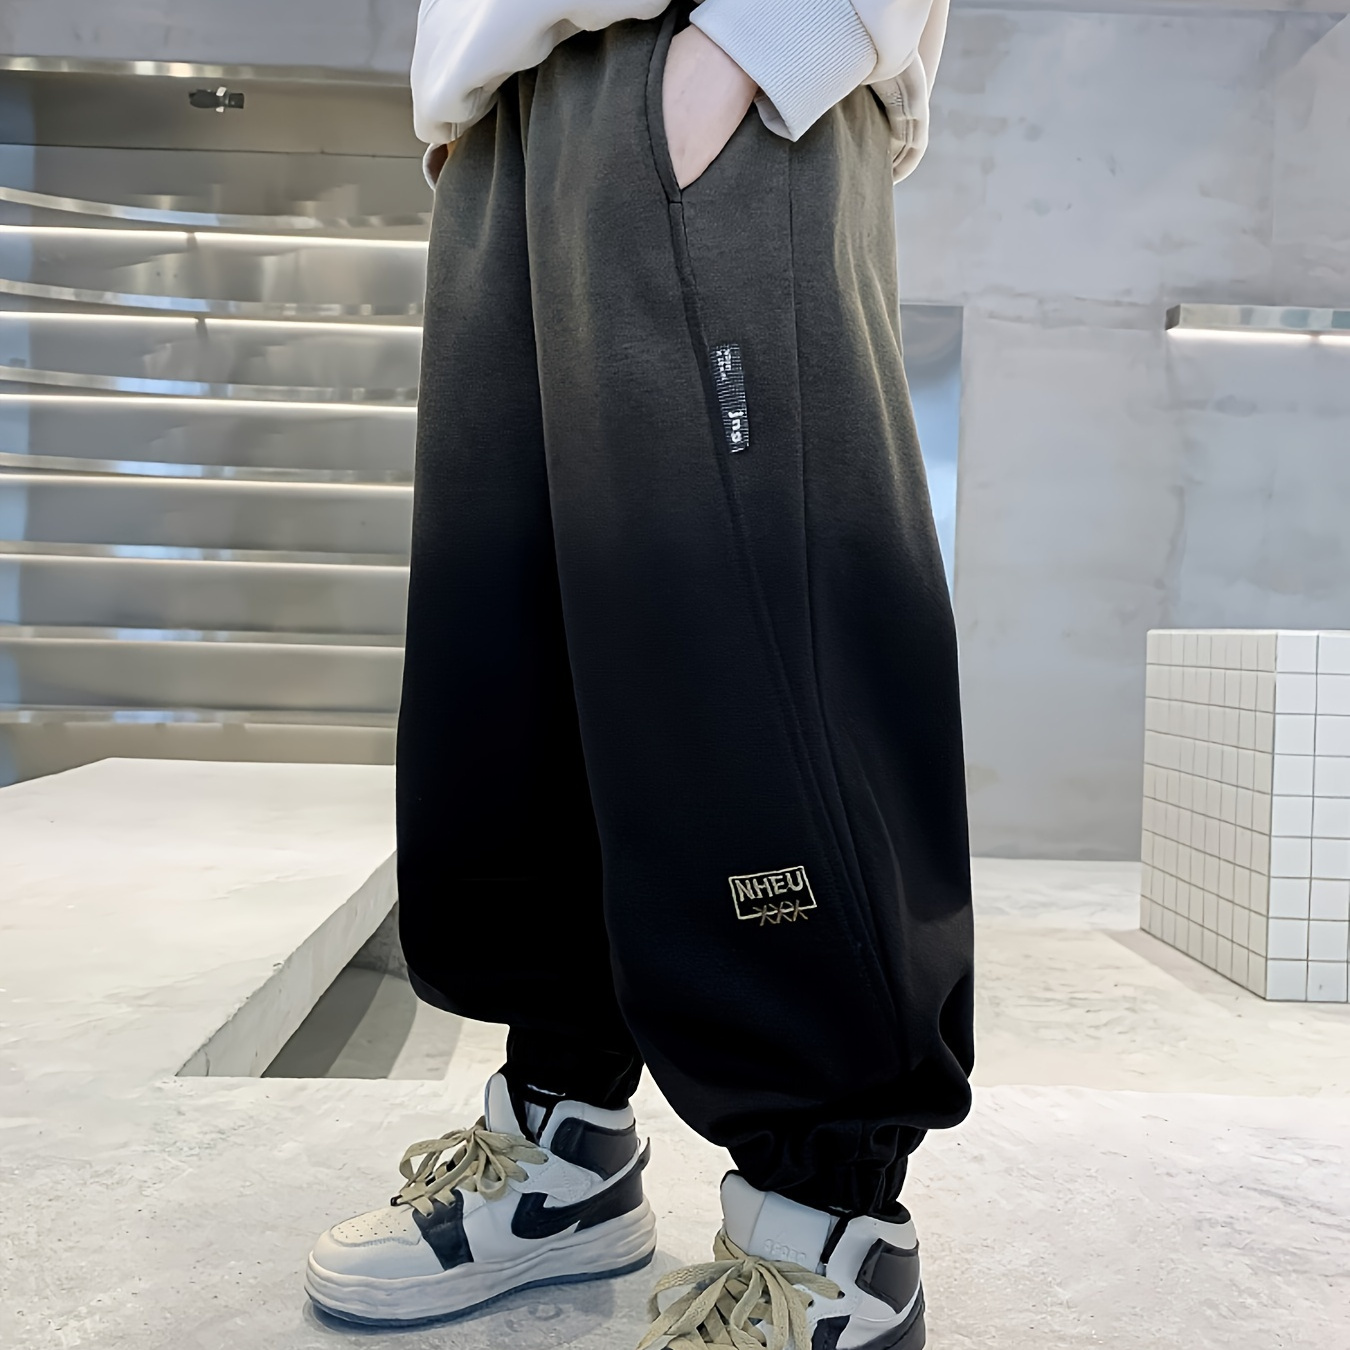 

Trendy Gradient Sweatpants For Boys, Elastic Waist Pocket Comfy Sports Clothing For Spring Fall, K-pop